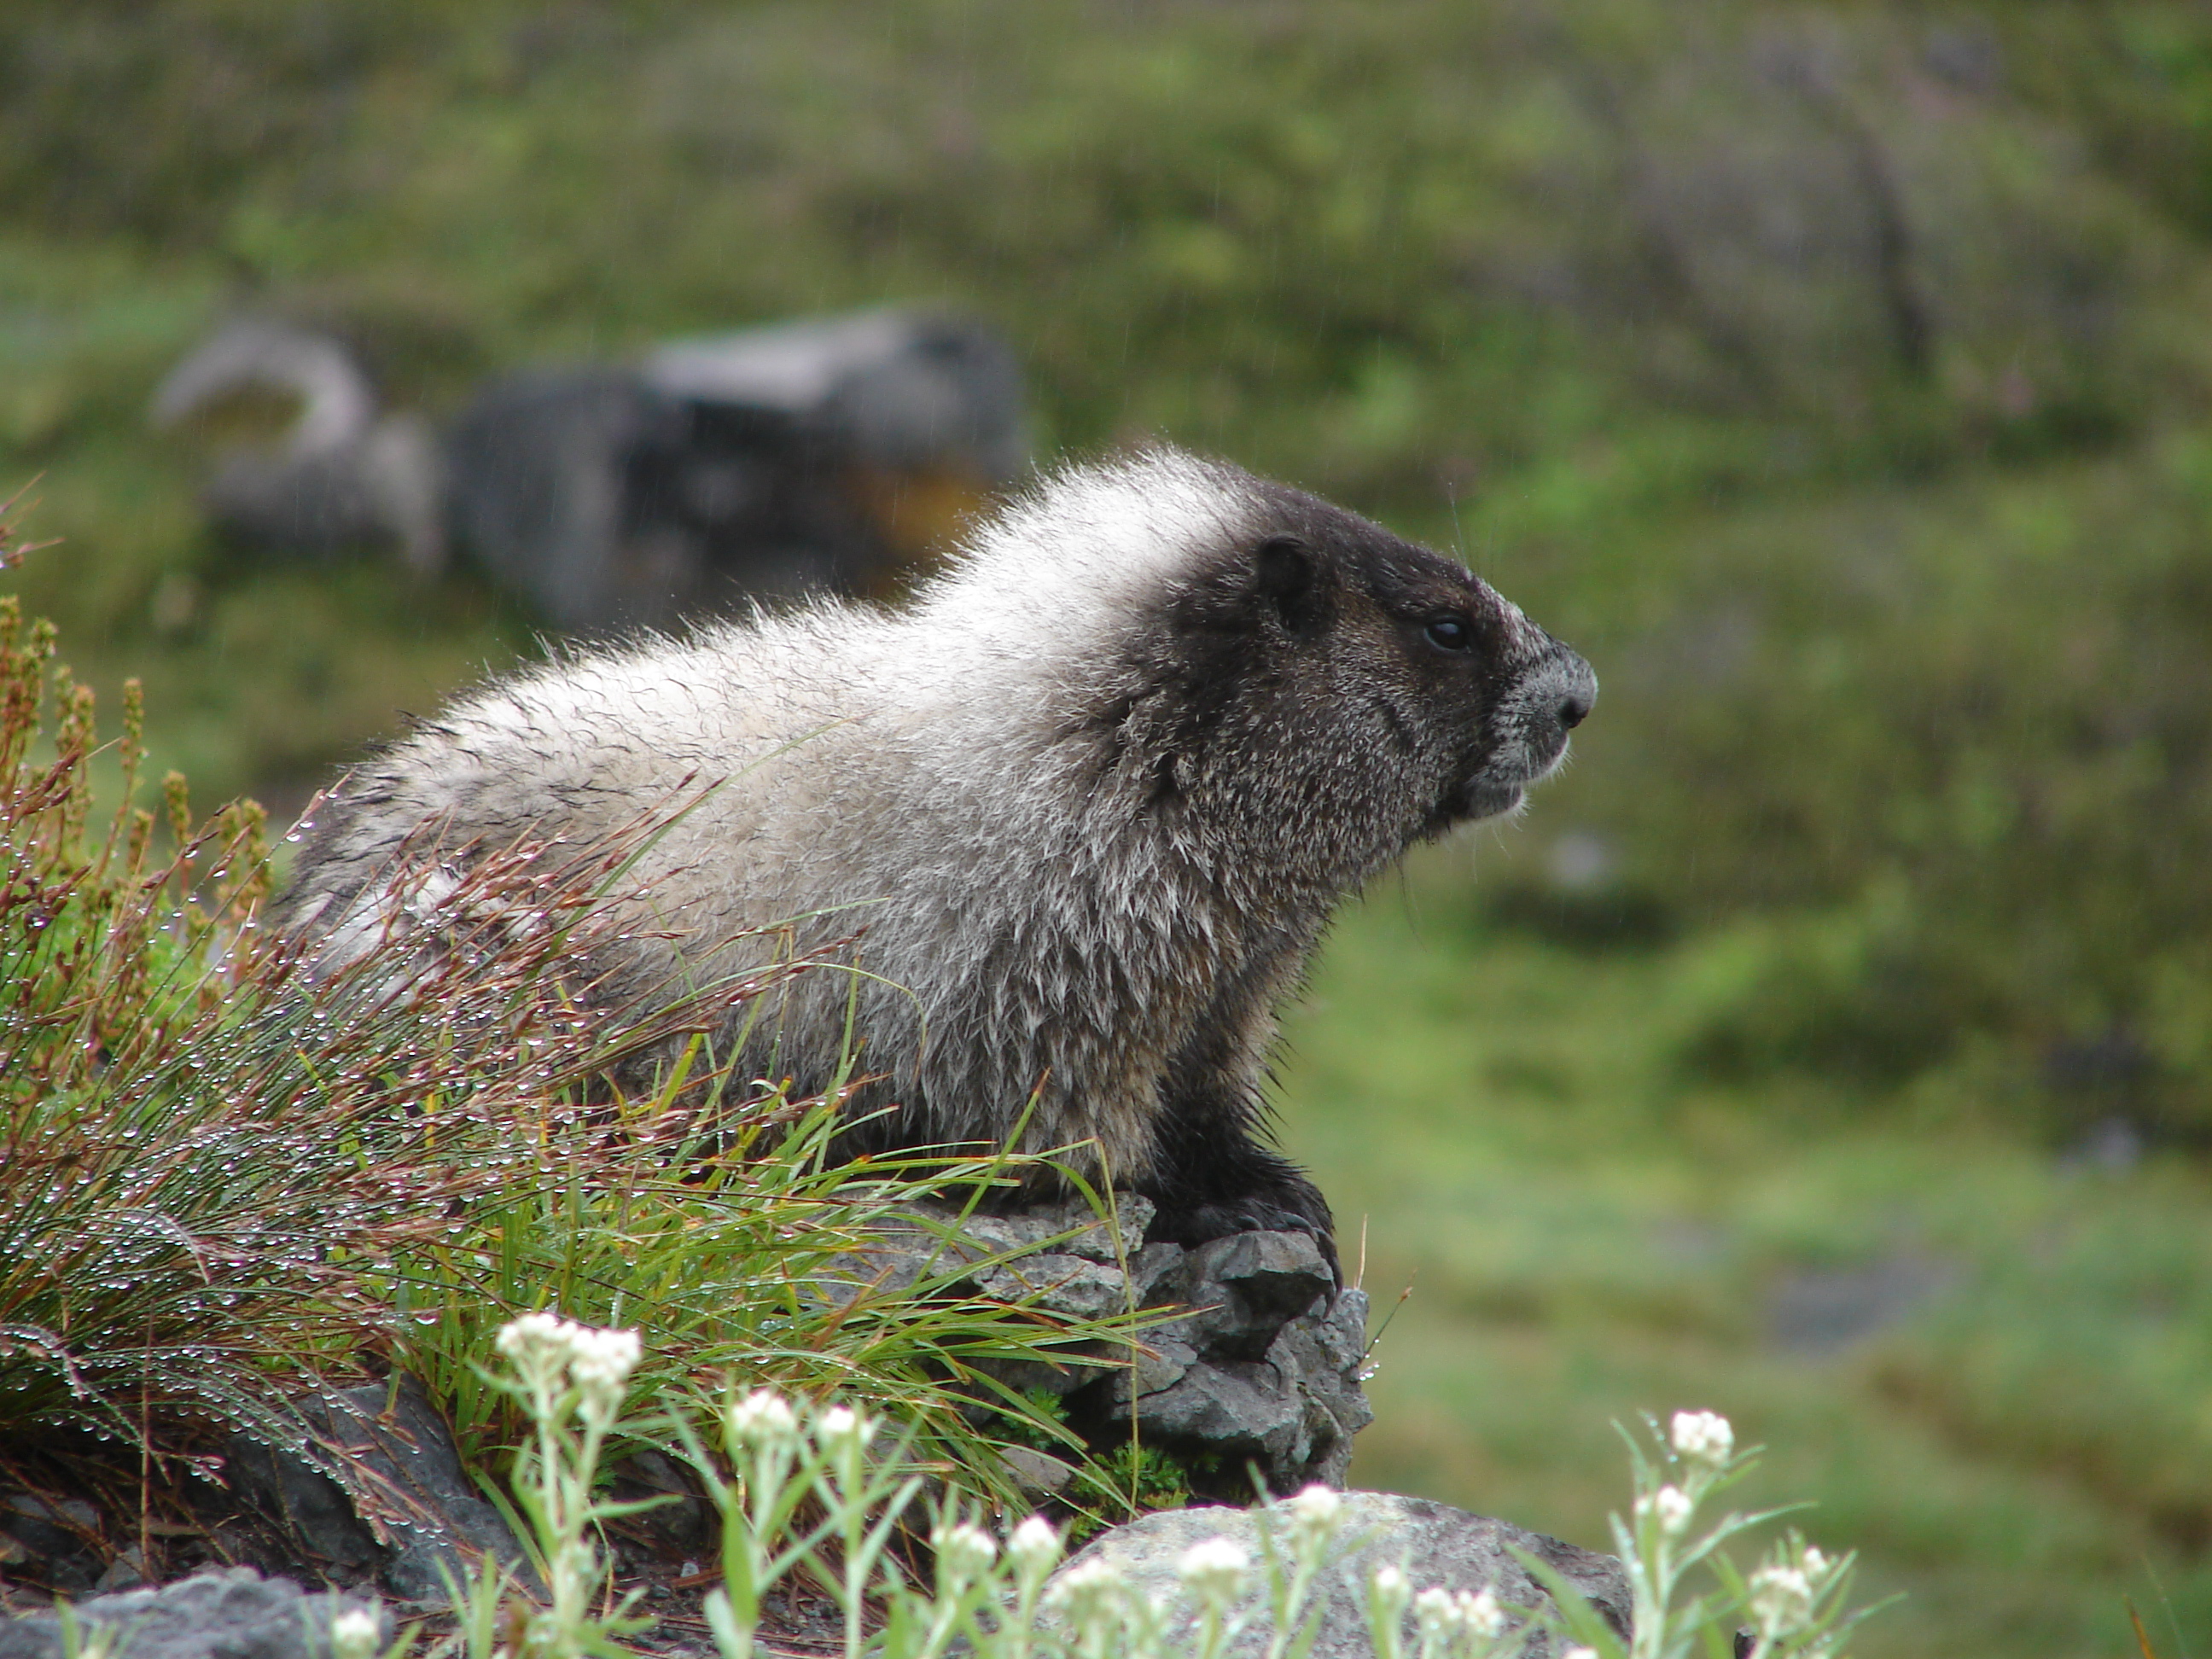 A hoary marmot with white frosted fur rests on a rock beside white flowers in a meadow.